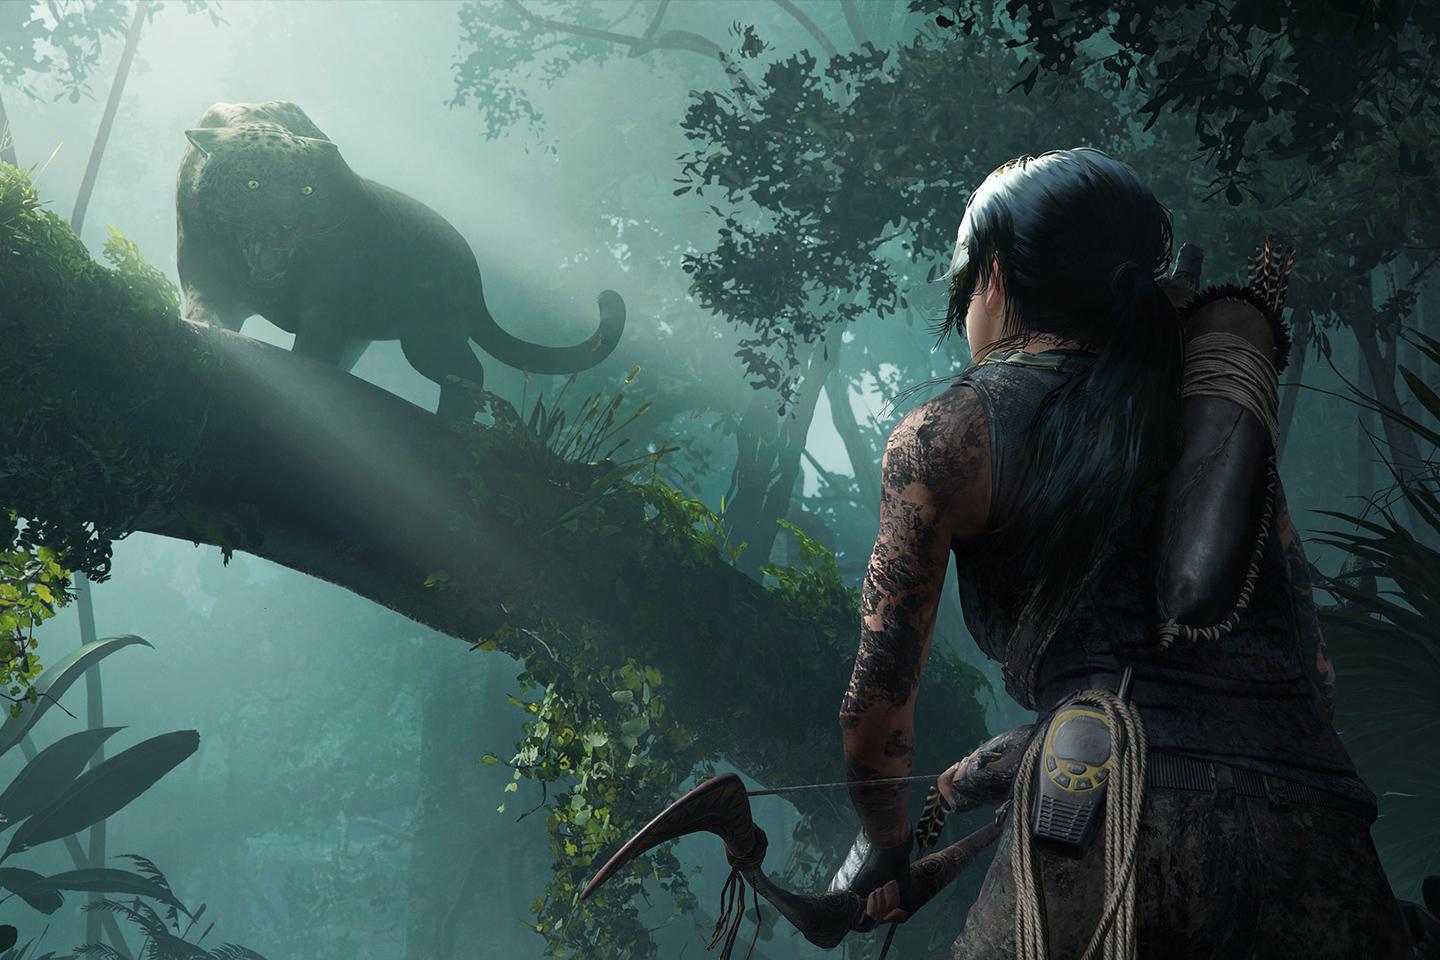 An intense moment from a Tomb Raider game where Lara Croft, armed with a bow, stealthily approaches a jaguar perched on a tree branch in a foggy, dense jungle environment.